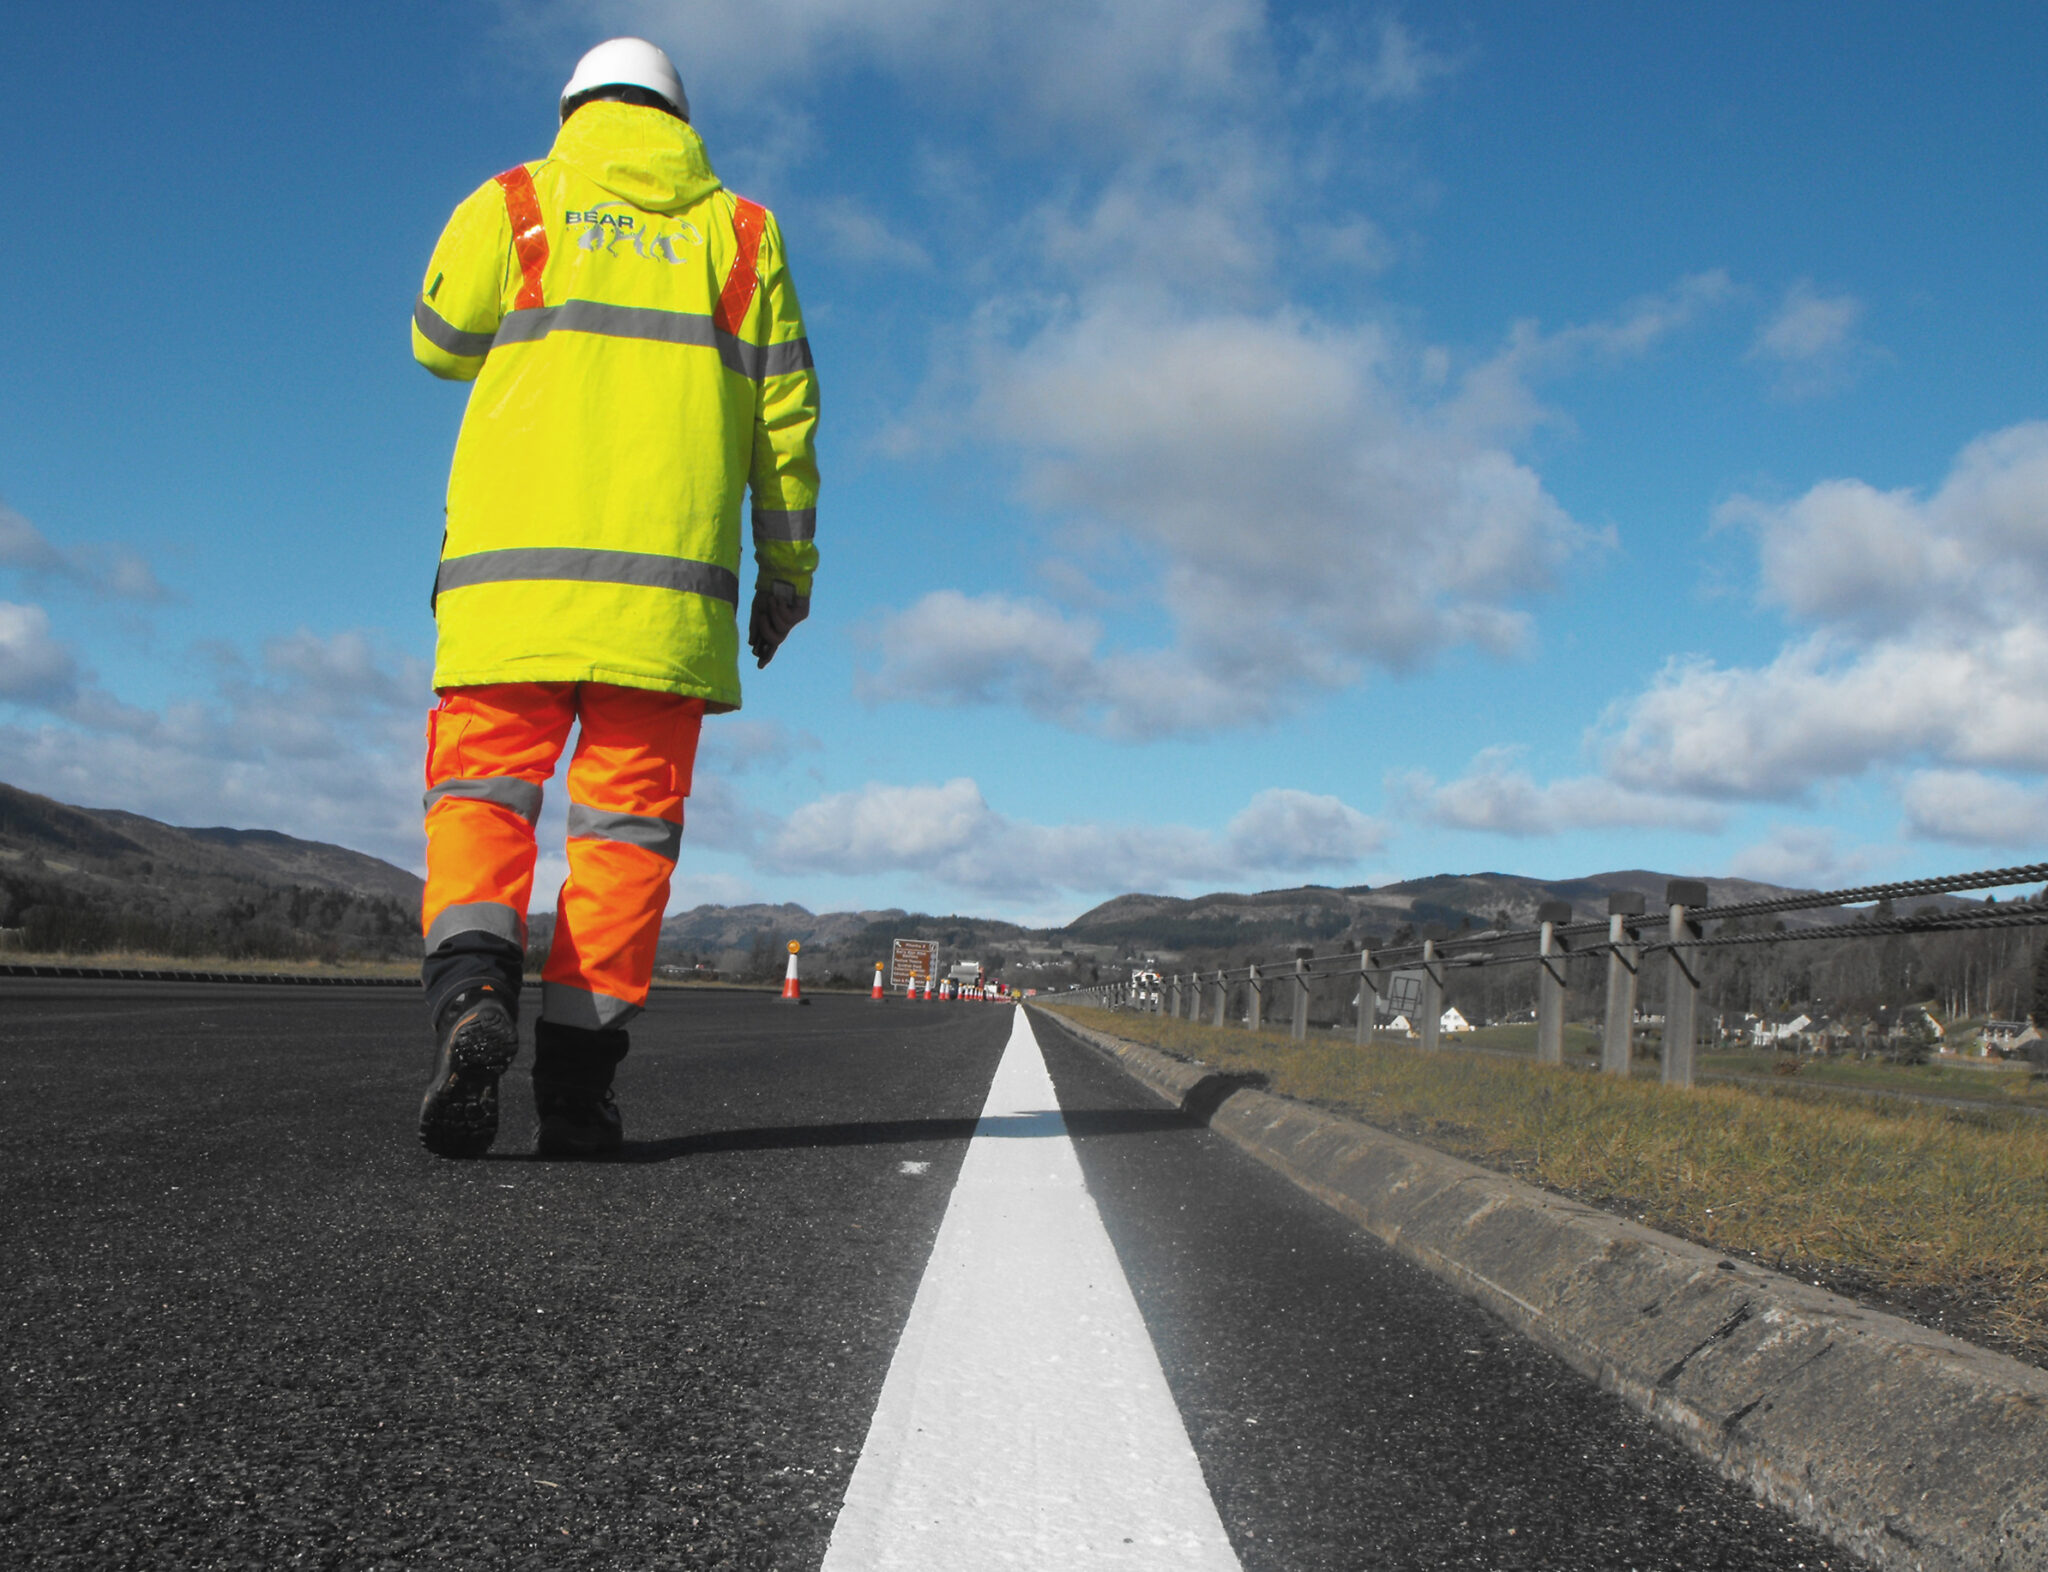 £365,000 SURFACING IMPROVEMENTS PLANNED FOR FIVE LOCATIONS ON THE A85 BETWEEN DALMALLY AND CONNEL